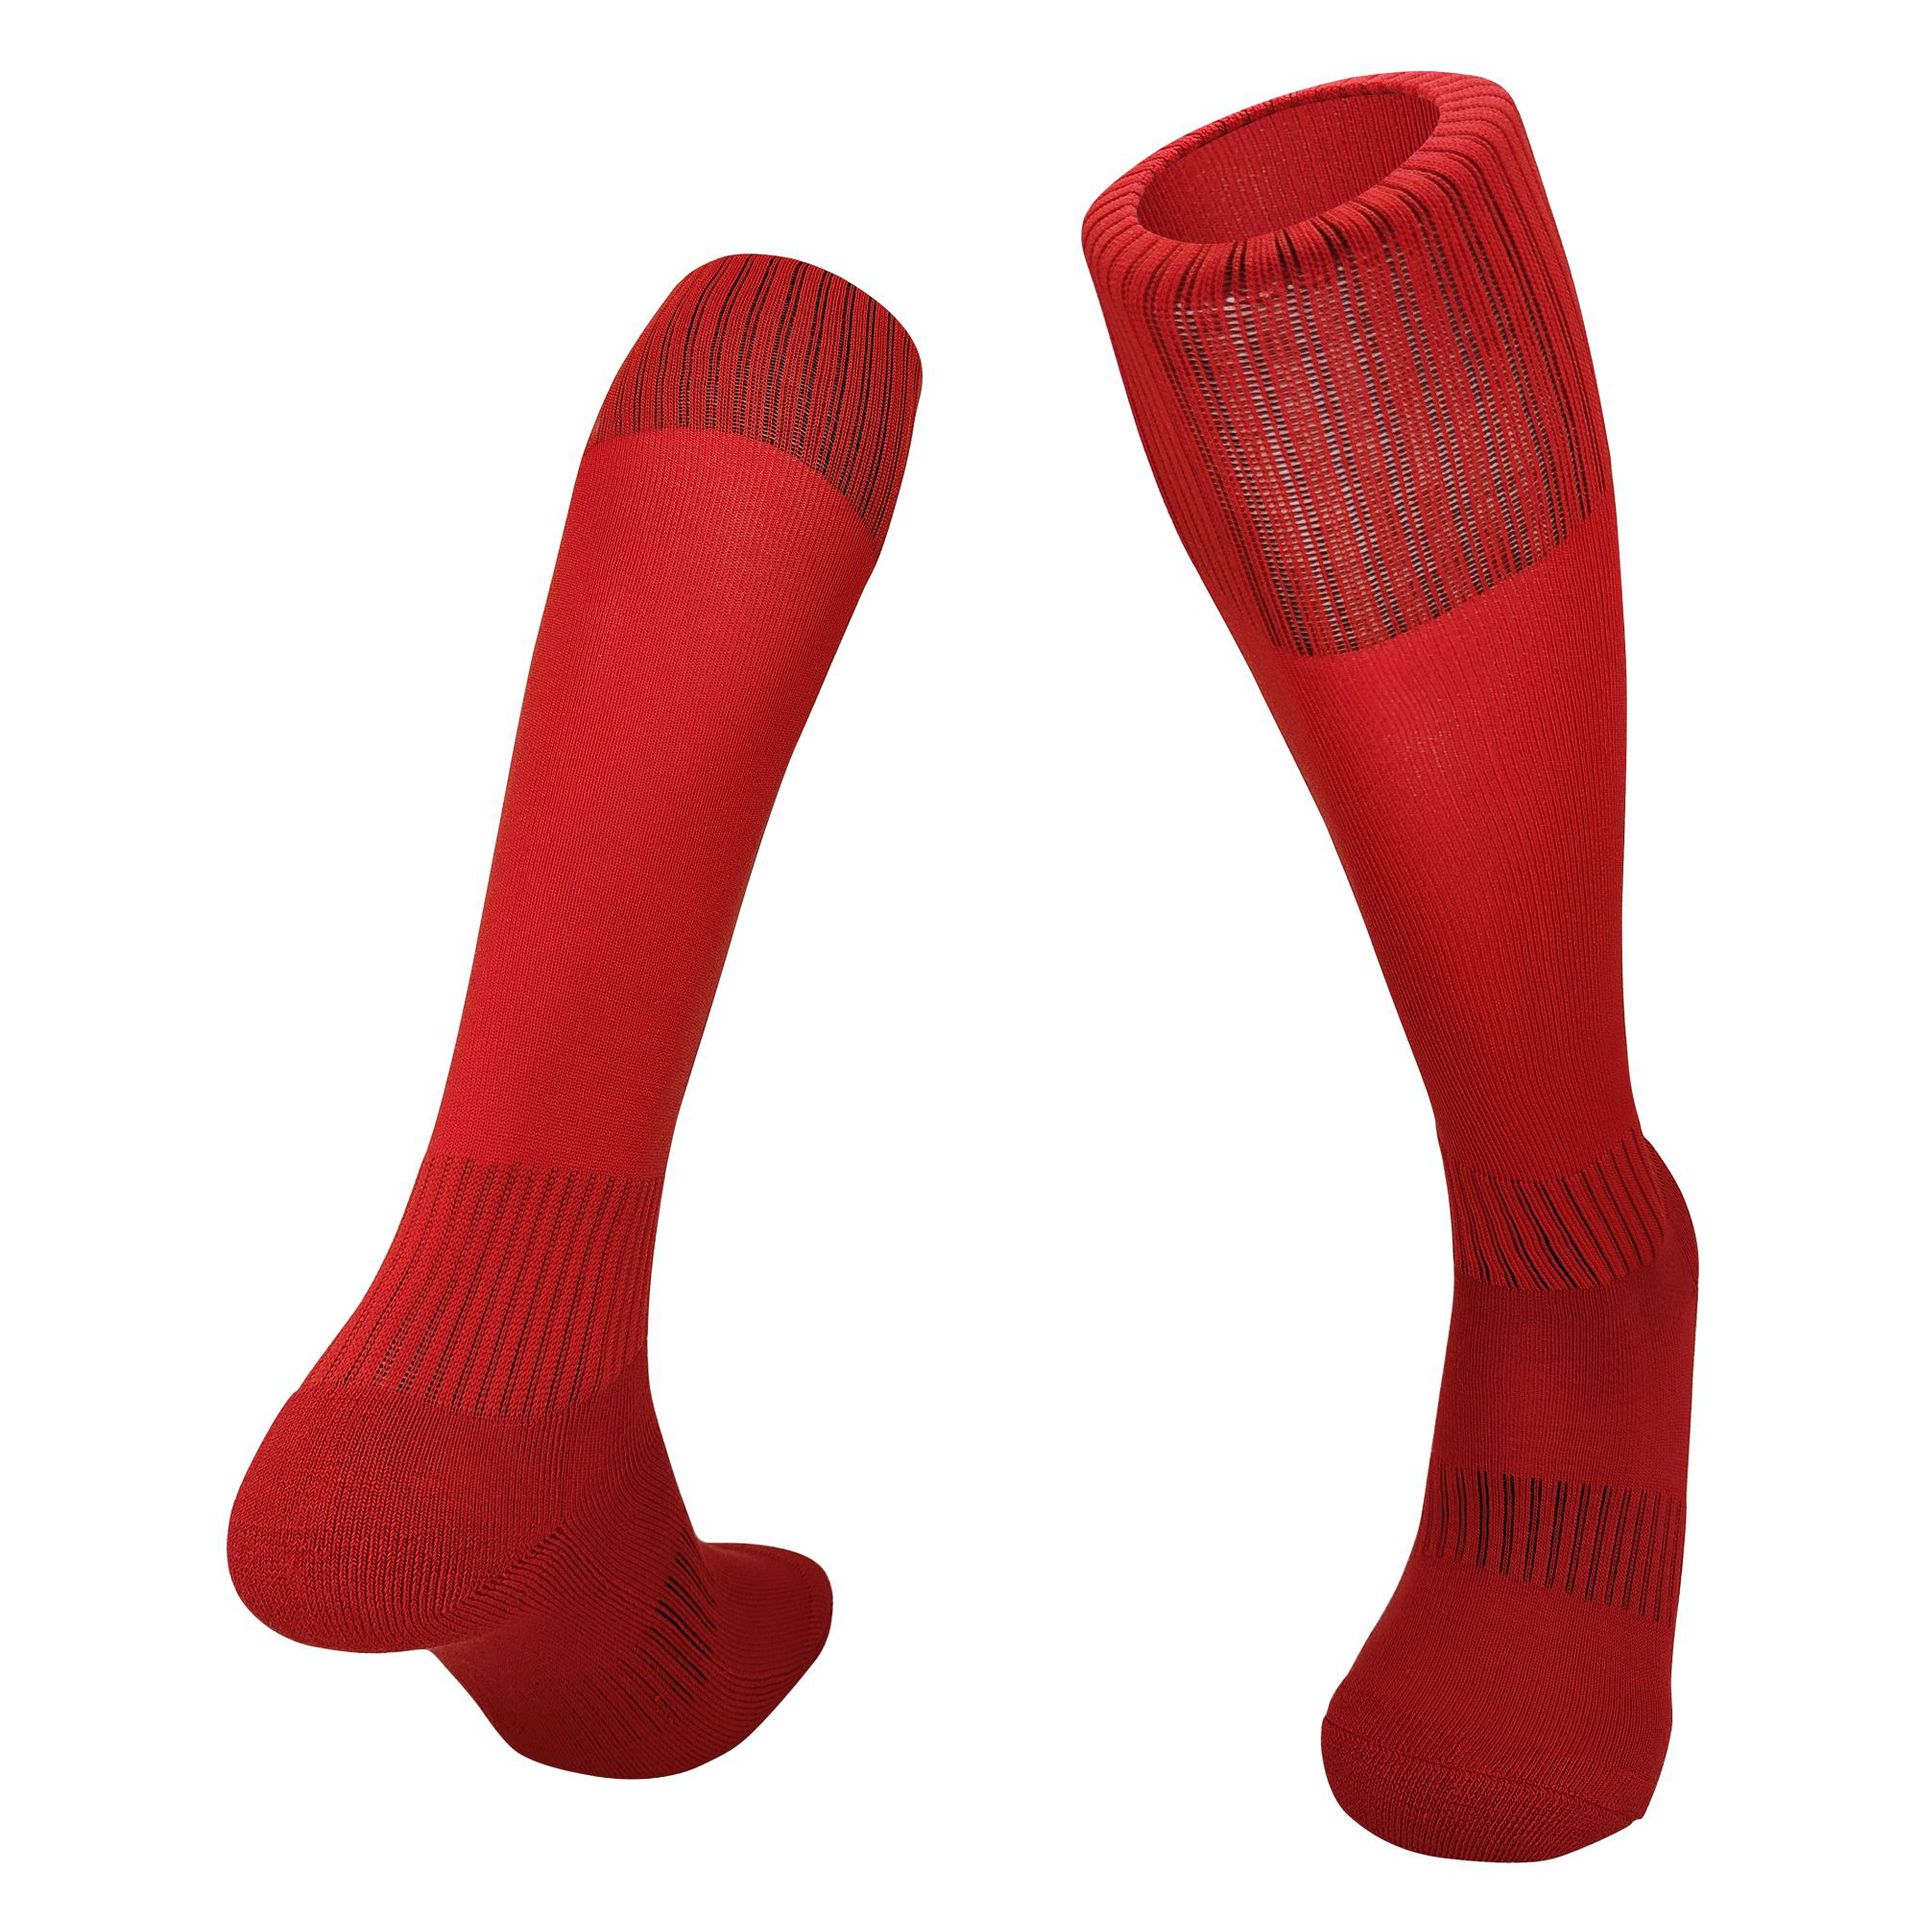 Light Board All-Match over the Knee Stockings Soccer Socks Adult and Children Terry Sole Socks Sweat-Absorbent Breathable Sports Socks Wholesale